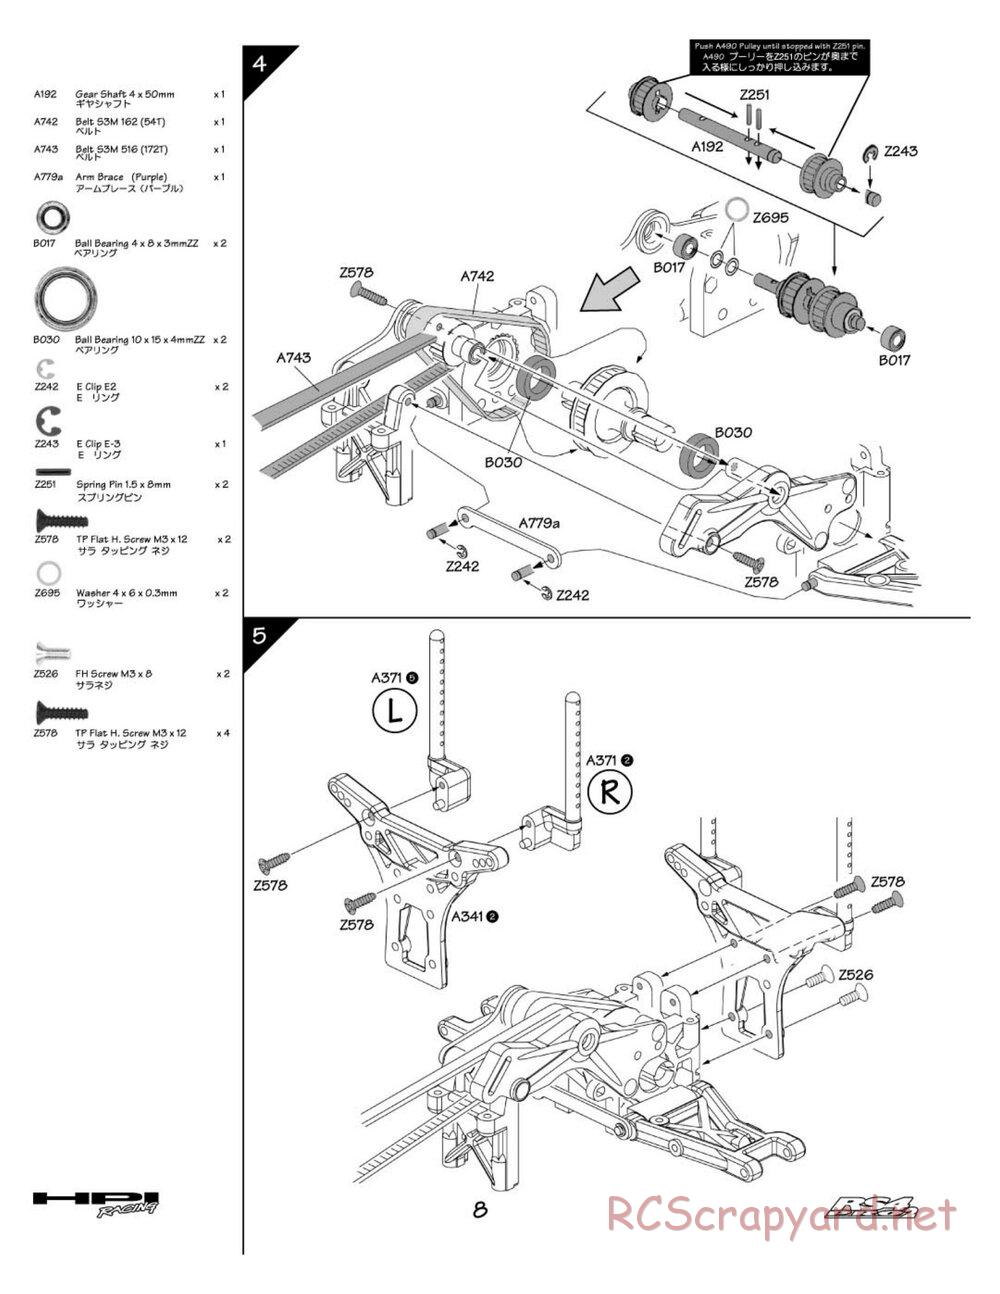 HPI - RS4 Pro 2 - Manual - Page 8